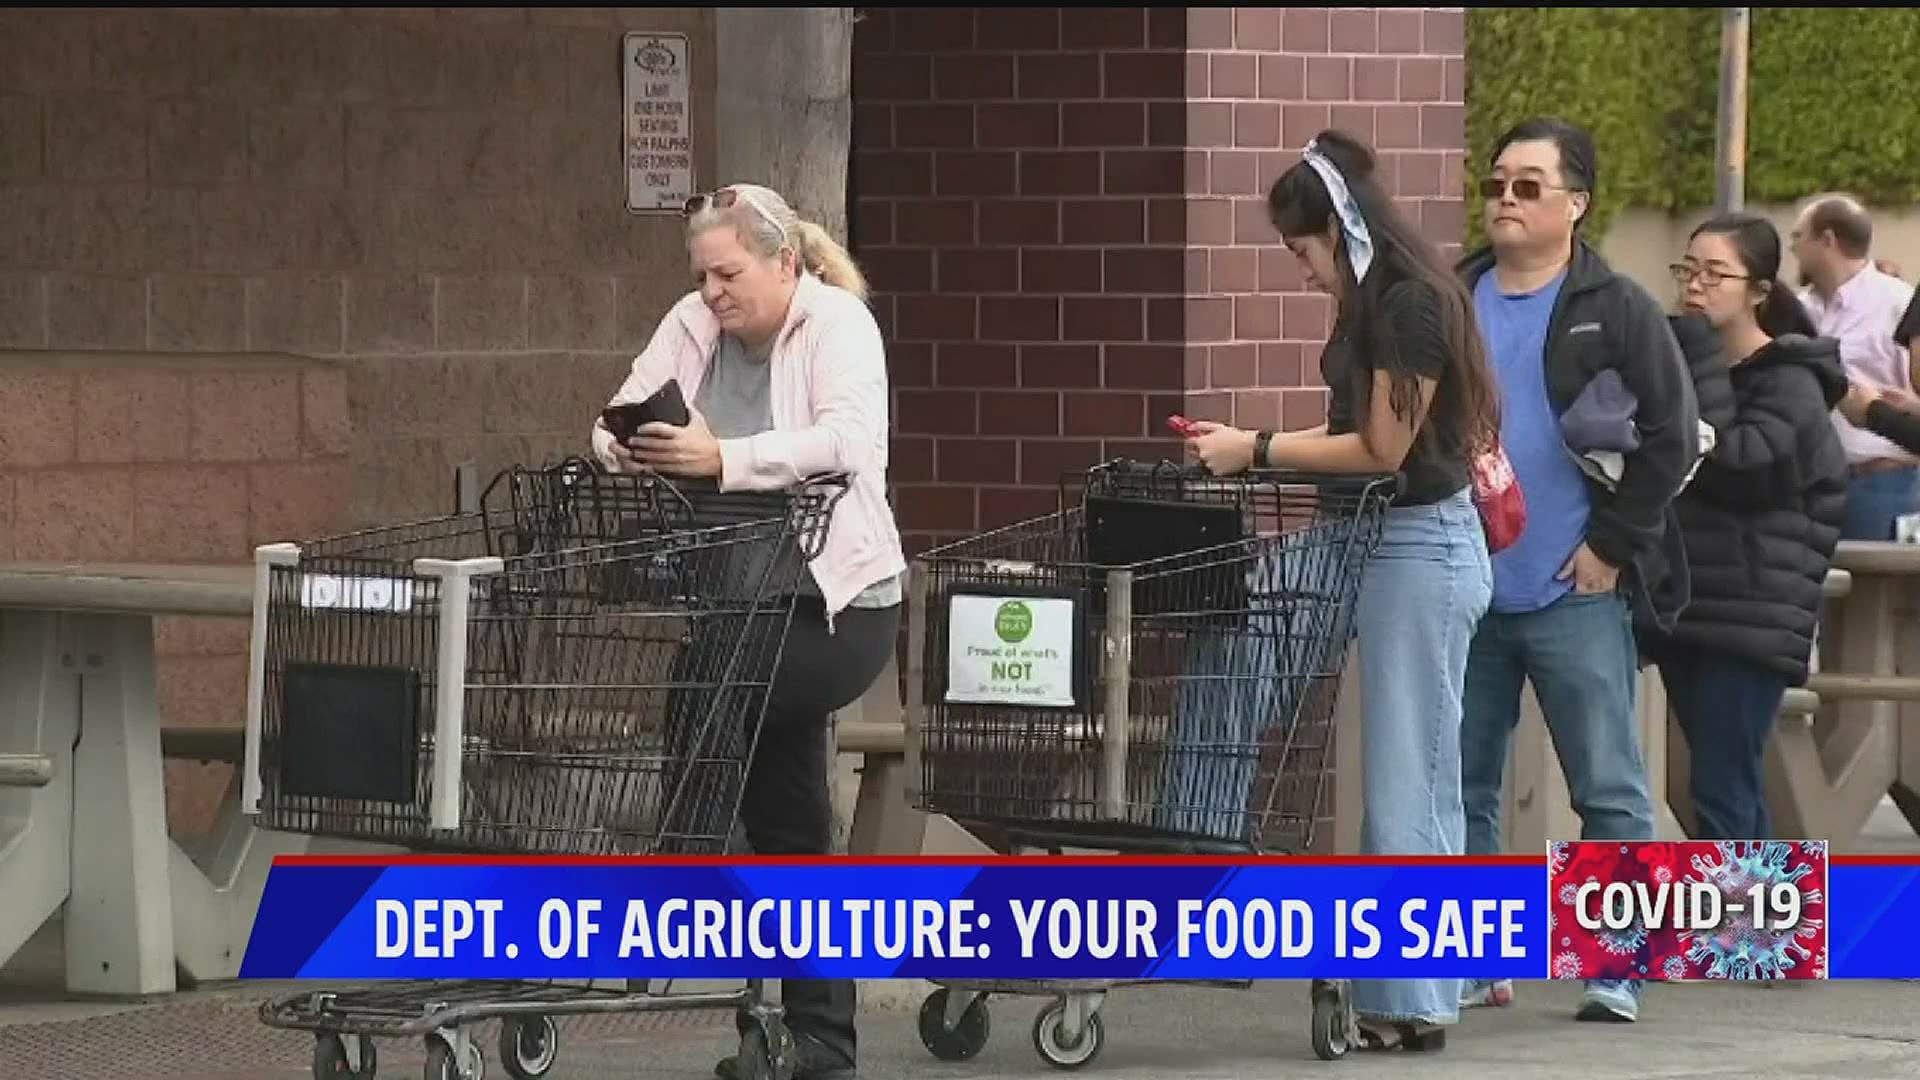 The Department of Agriculture is reassuring the public the state's food supply is safe, and the coronavirus is not transmissible through food.